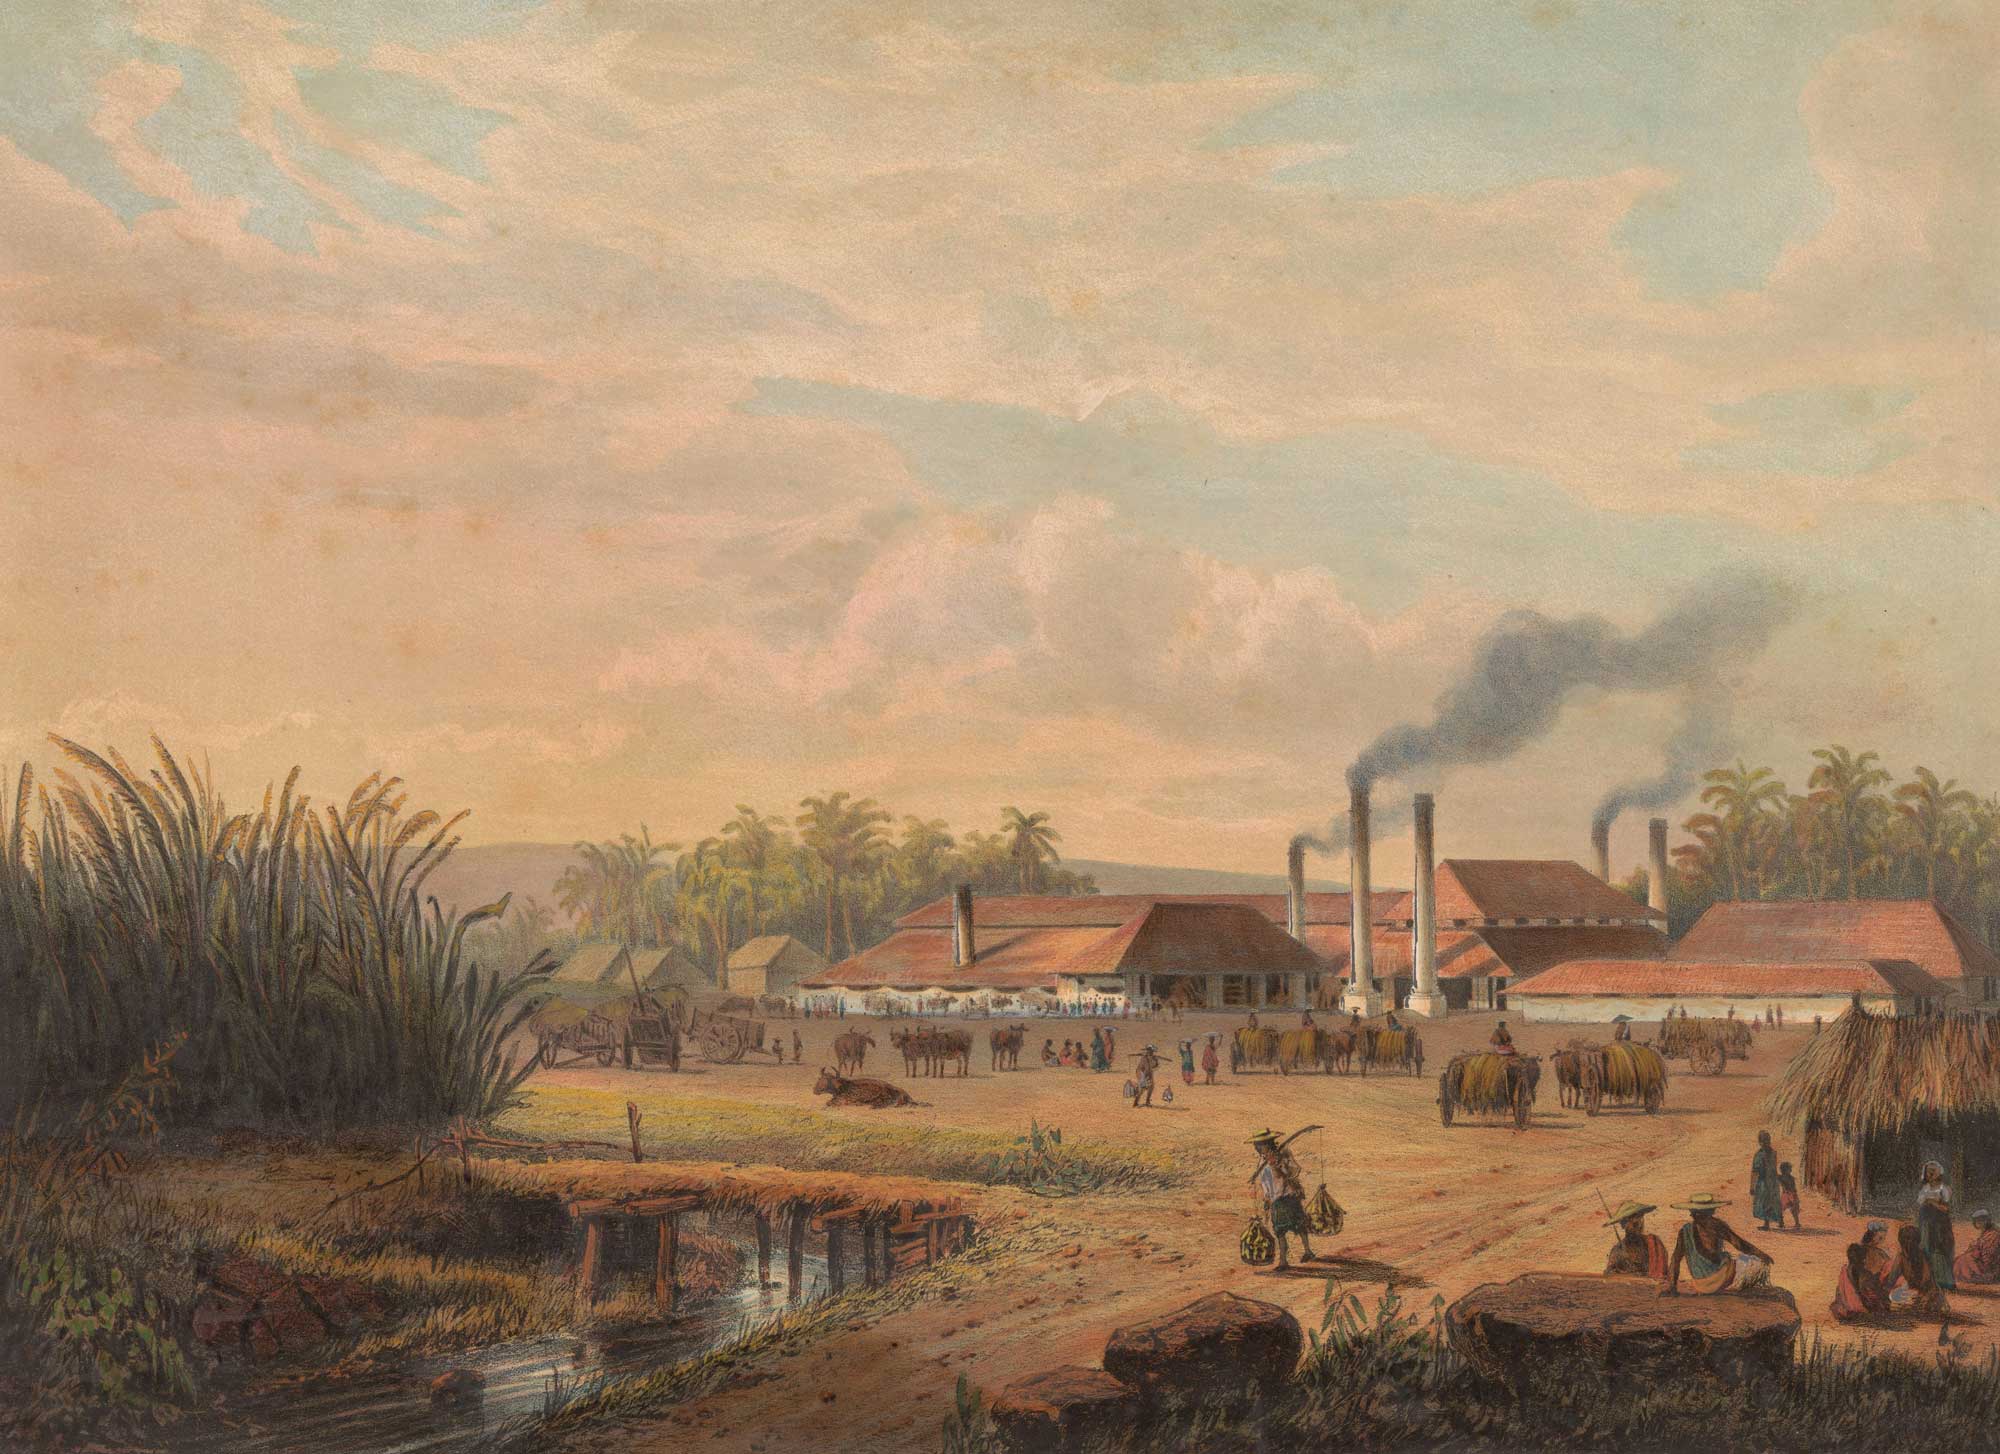 Painting of a sugar refinery on Java dating to about 1865 to 1872. The photo shows white buildings with red roofs and chimneys emitting smoke in the background. In the foreground, wagons can be seen transporting cut sugarcane to the refinery.